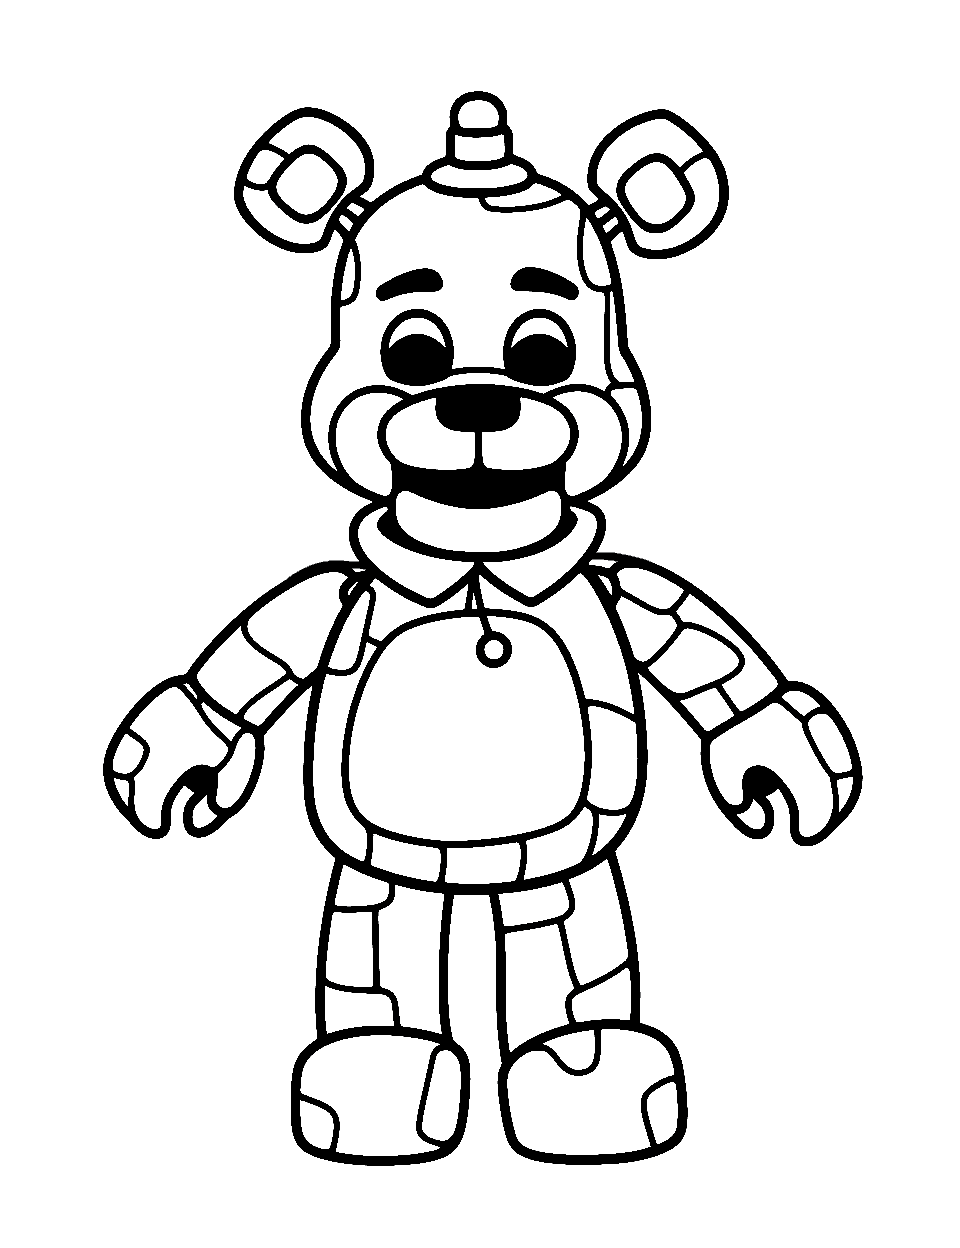 Minimalistic Fredbear Five Nights at Freddys Coloring Page - Fredbear in a minimalistic, easy-to-color design with no background.